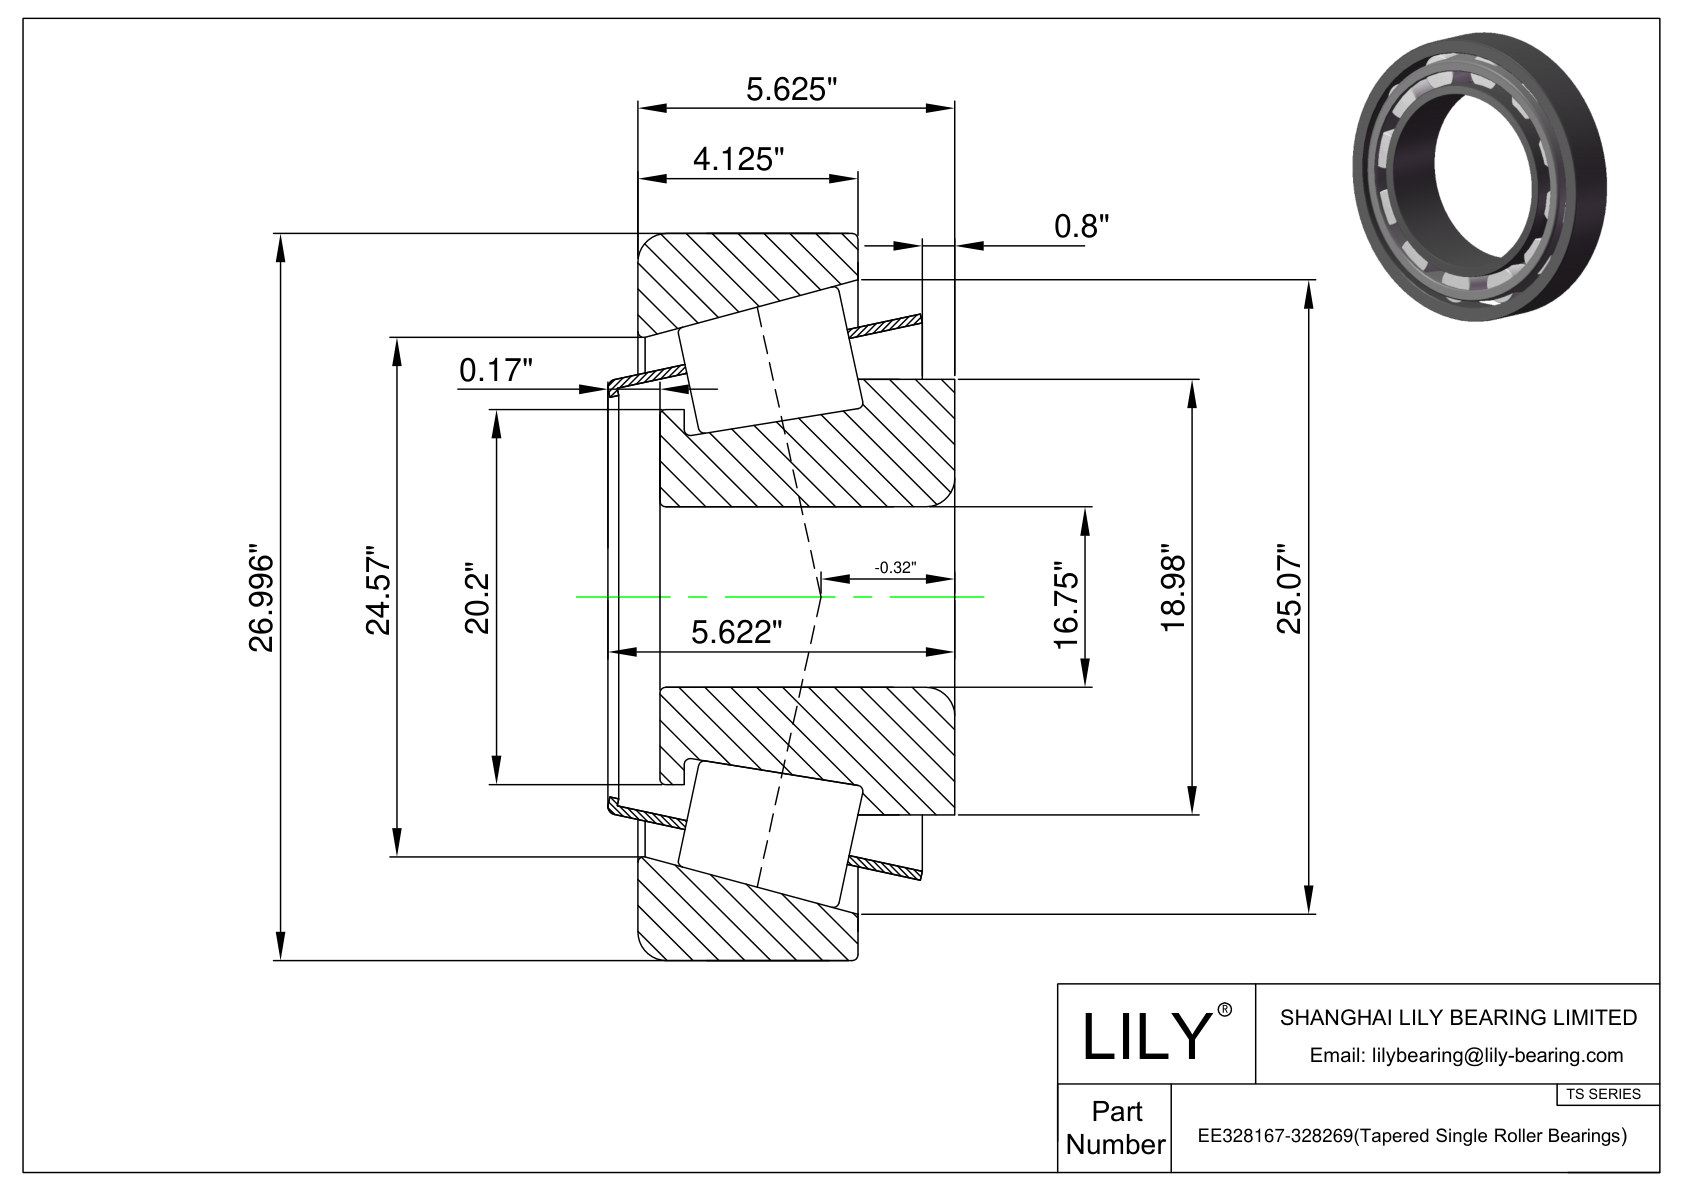 EE328167-328269 TS (Tapered Single Roller Bearings) (Imperial) cad drawing